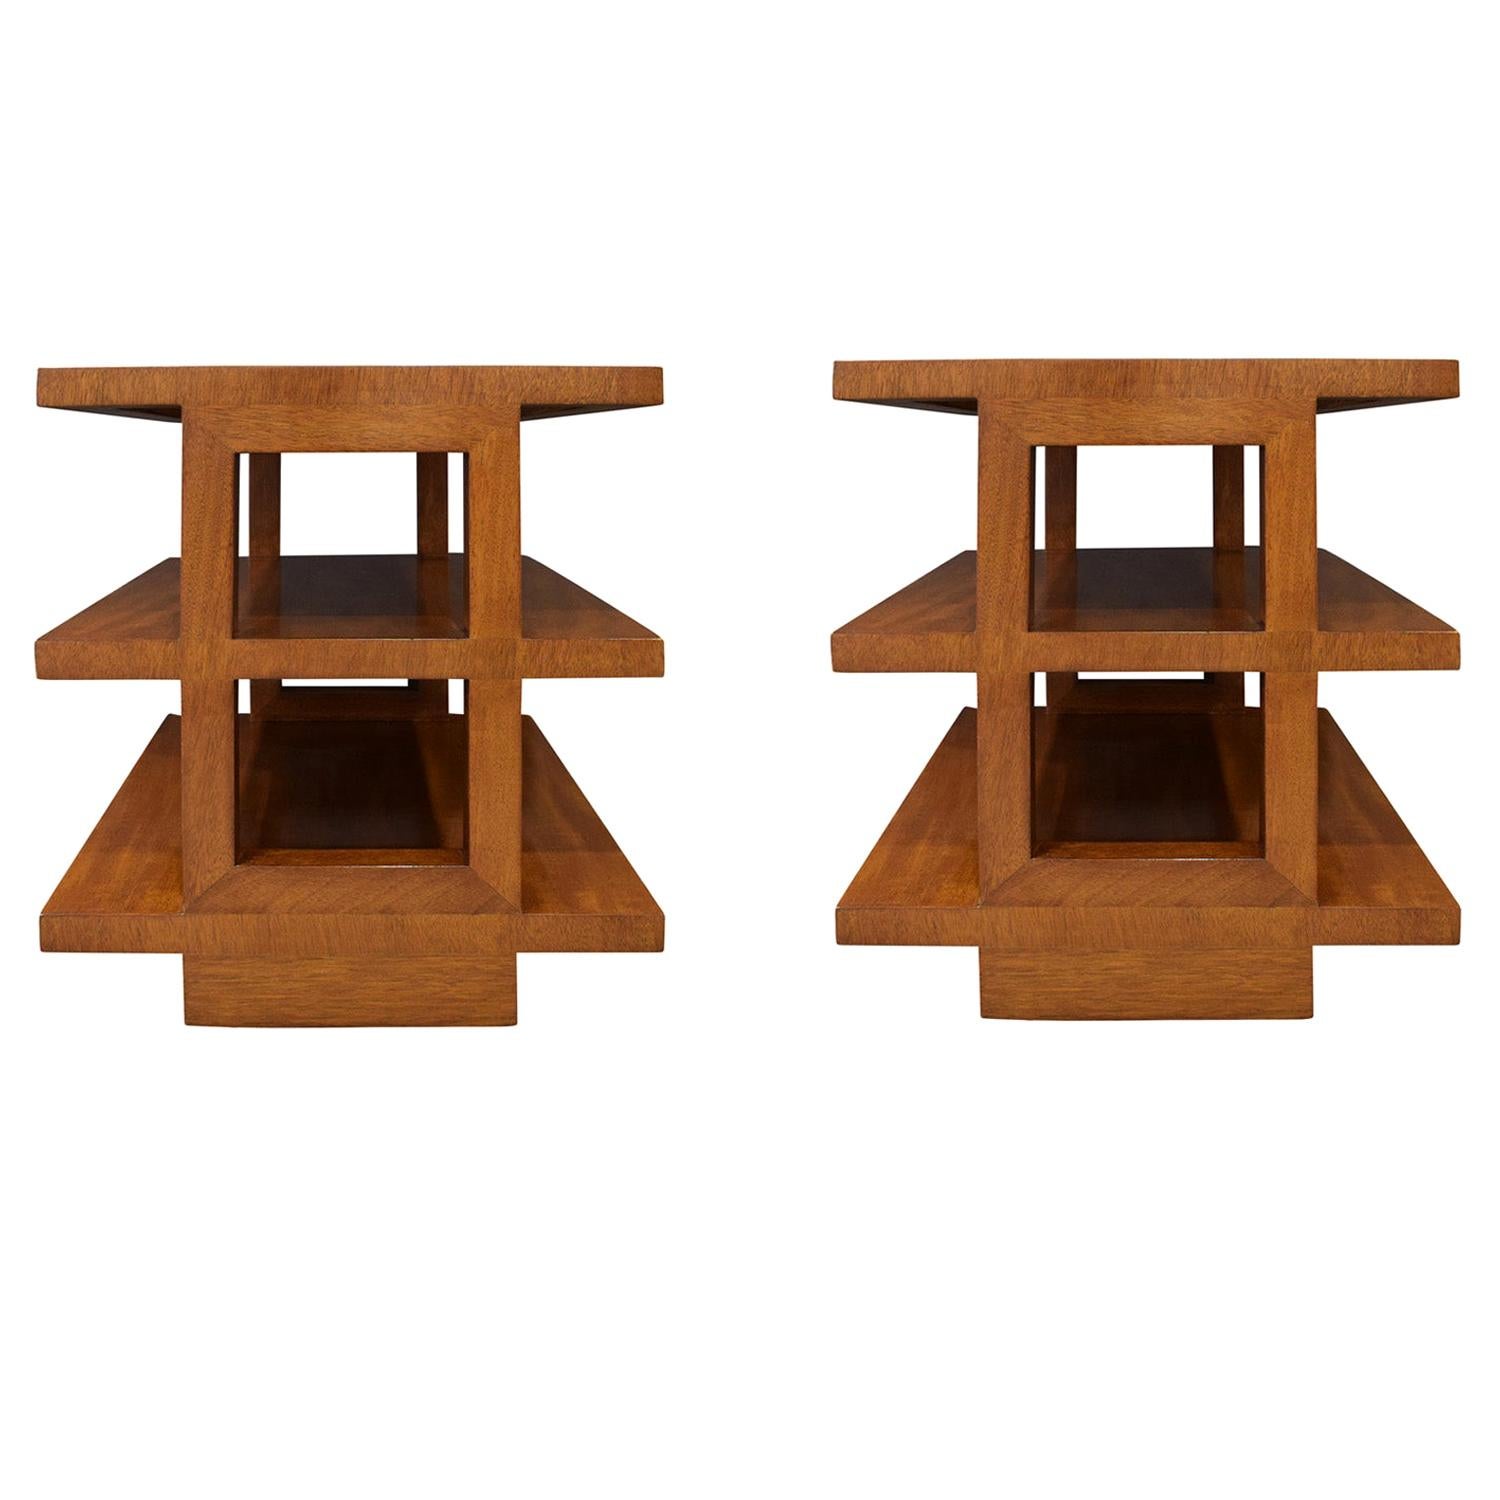 Edward Wormley Pair of Rare 3-Tier End Tables 1944 'Signed'